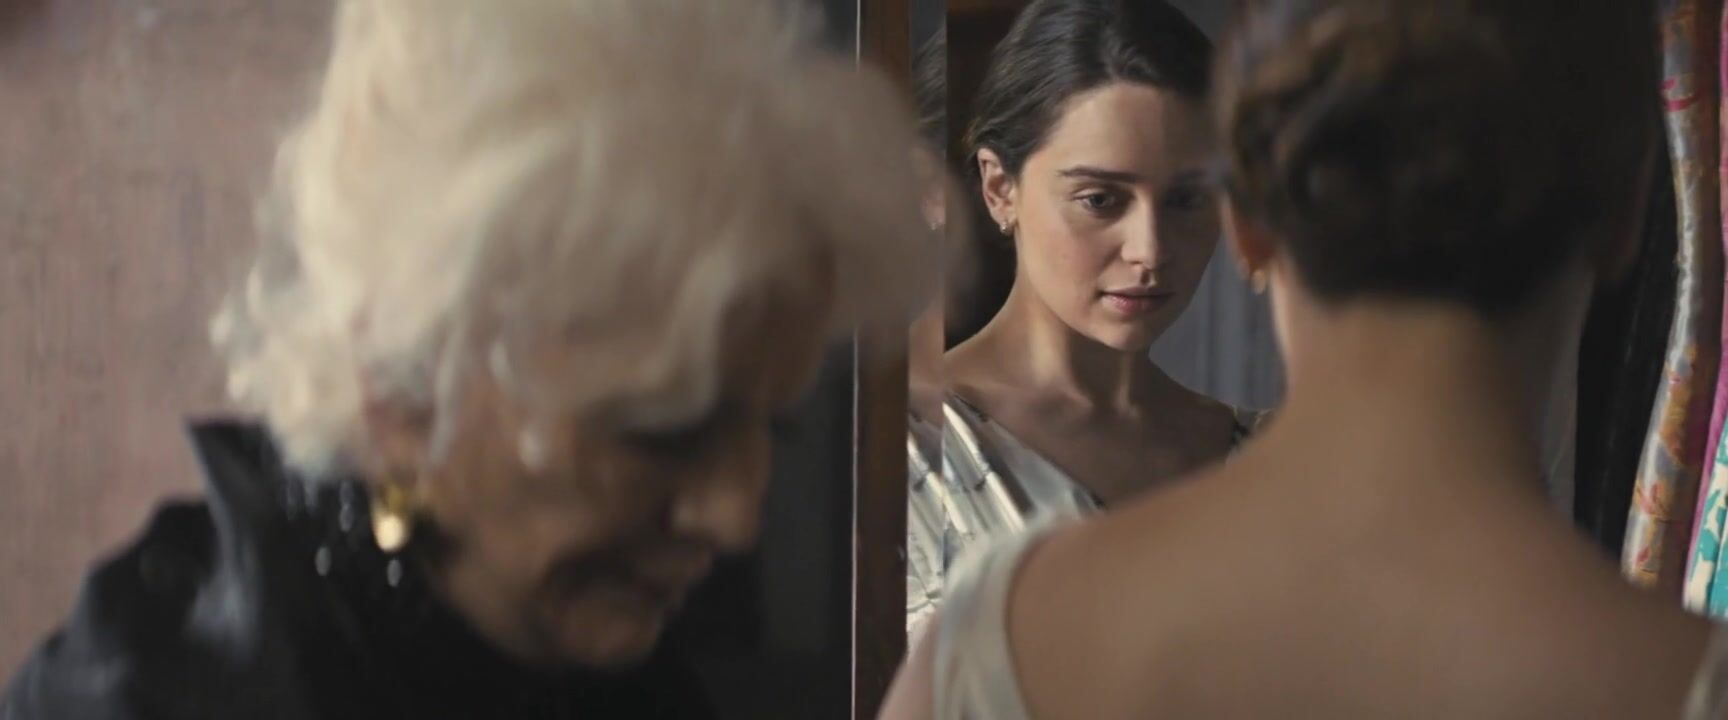 Show Hot movie whore Emilia Clarke shows off beautiful body in Voice from the Stone (2017) Free Rough Sex - 2